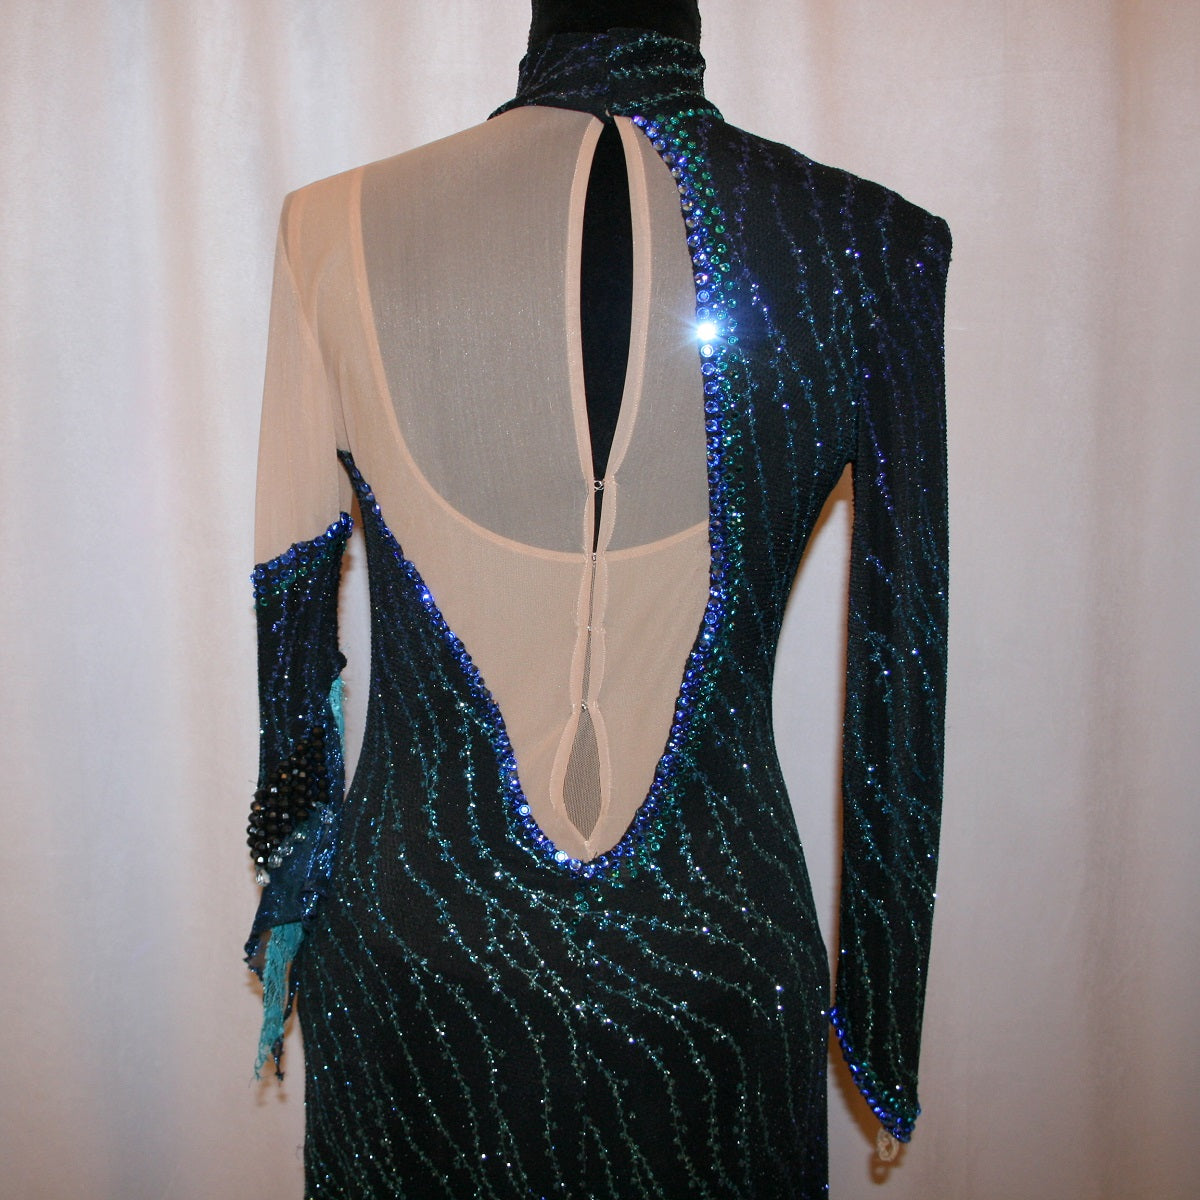 upper back view of black Latin-rhythm dress sparkles plenty on the dance floor with a stunning black glitter fabric featuring a wavy turquoise, aqua & royal blue design, complete with black hand-beading, aqua teardrop shape beads, spangles, and intricate flounces in various fabrics of deep shimmering blue, turquoise, aqua & black. 